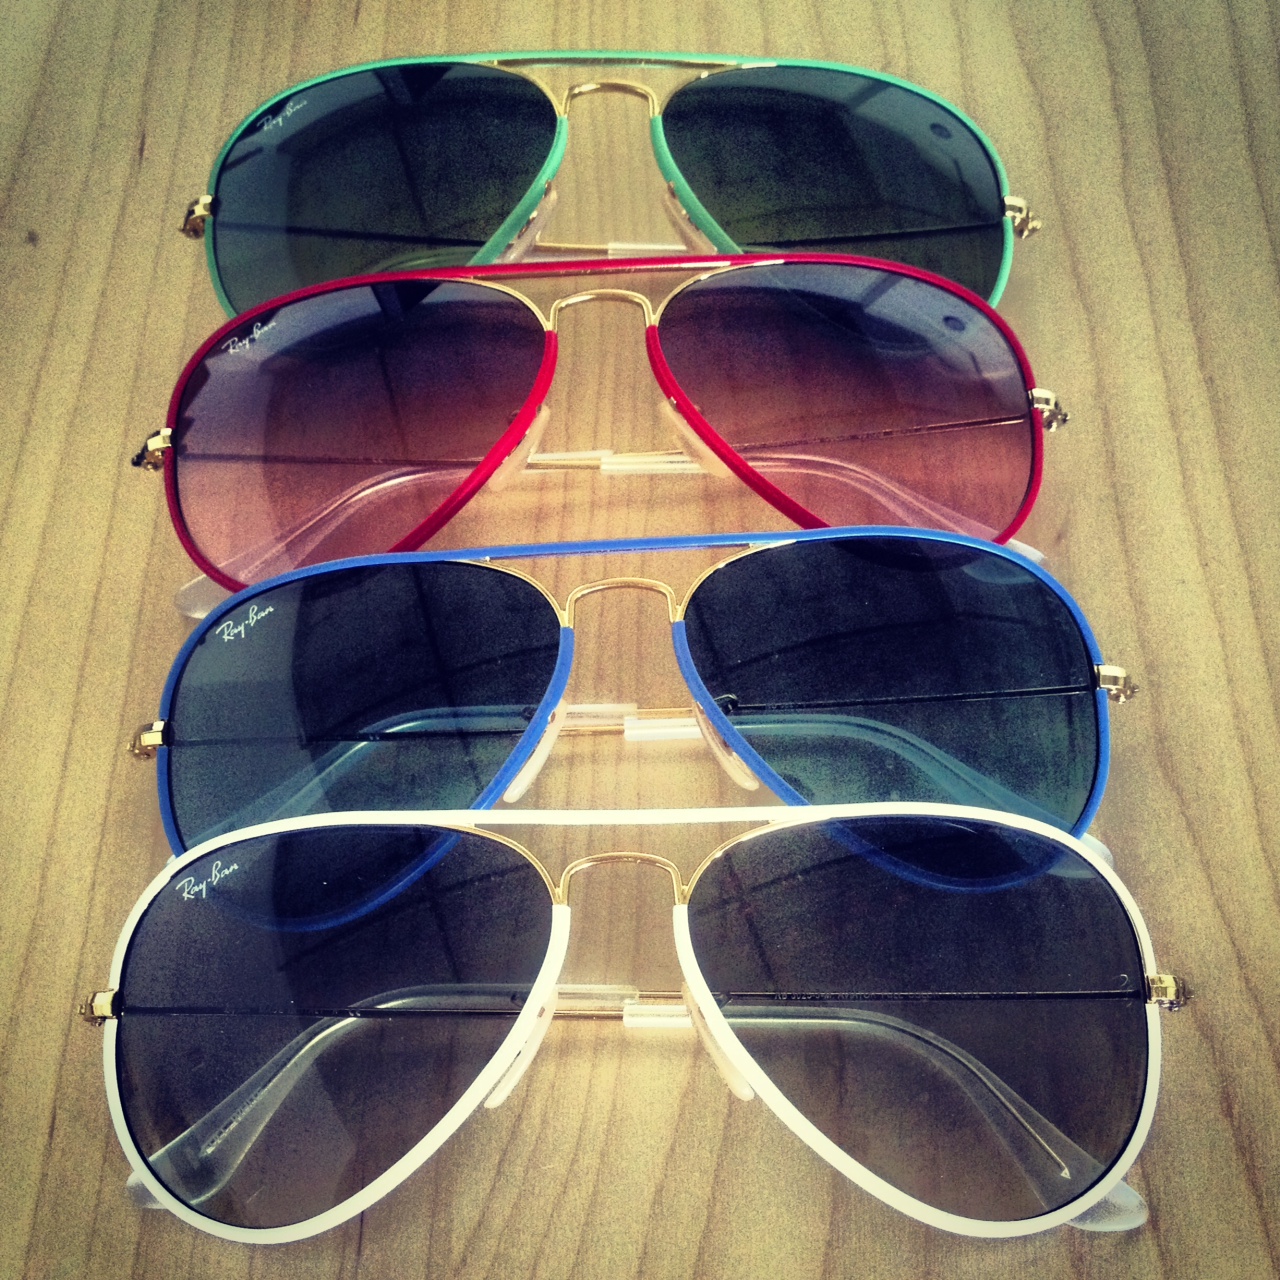 Ray-Ban FULL COLOR Aviators in Style 